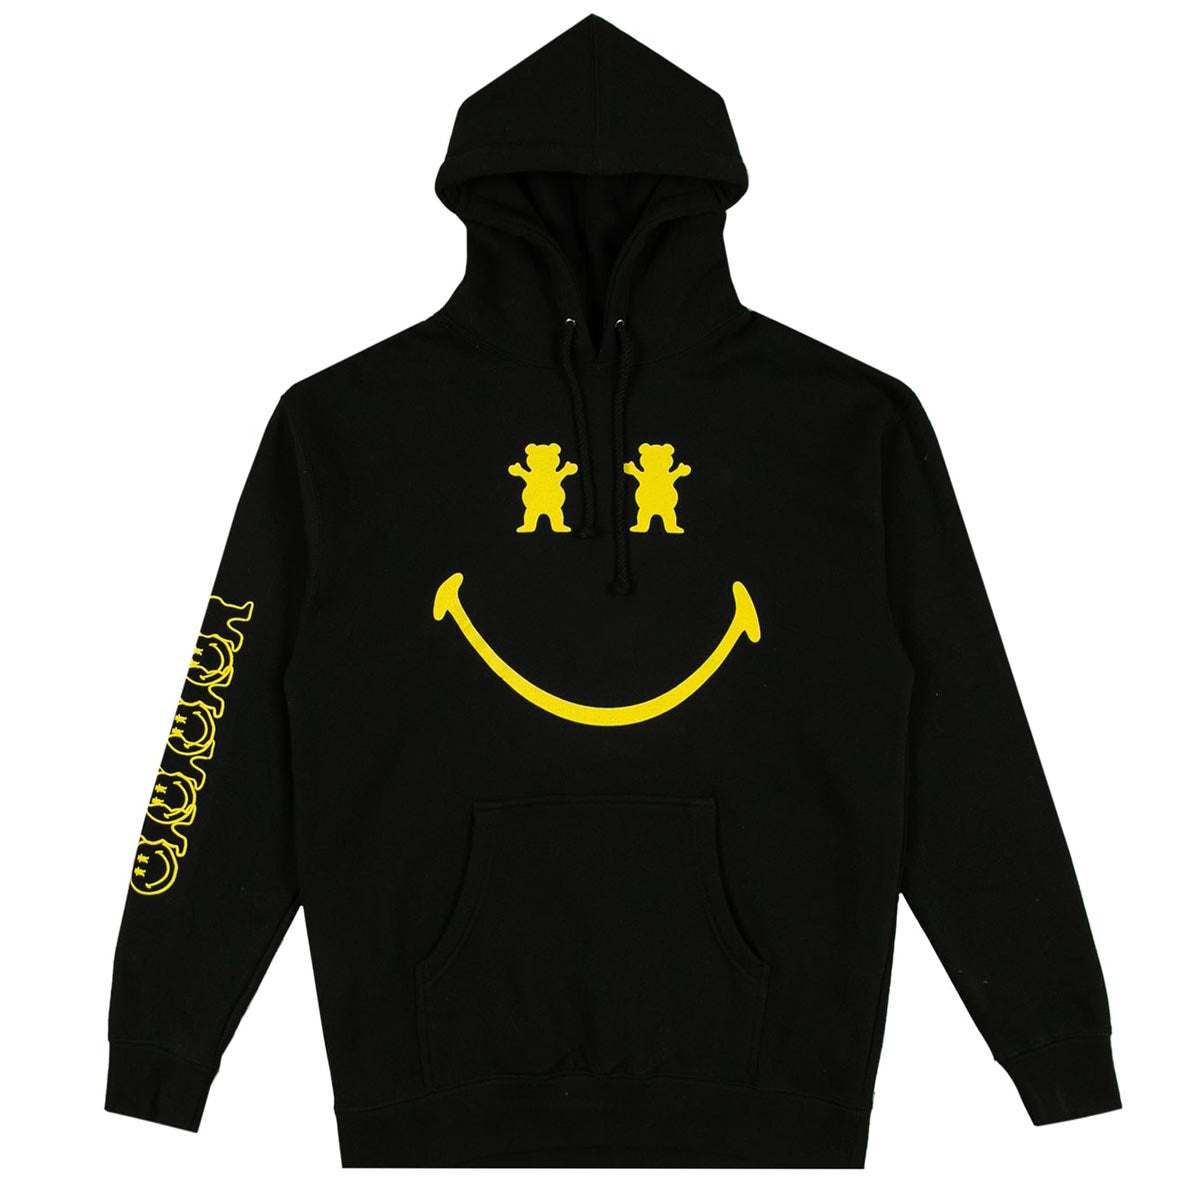 Grizzly x Smiley World Big Smile Hoodie - Black image 1